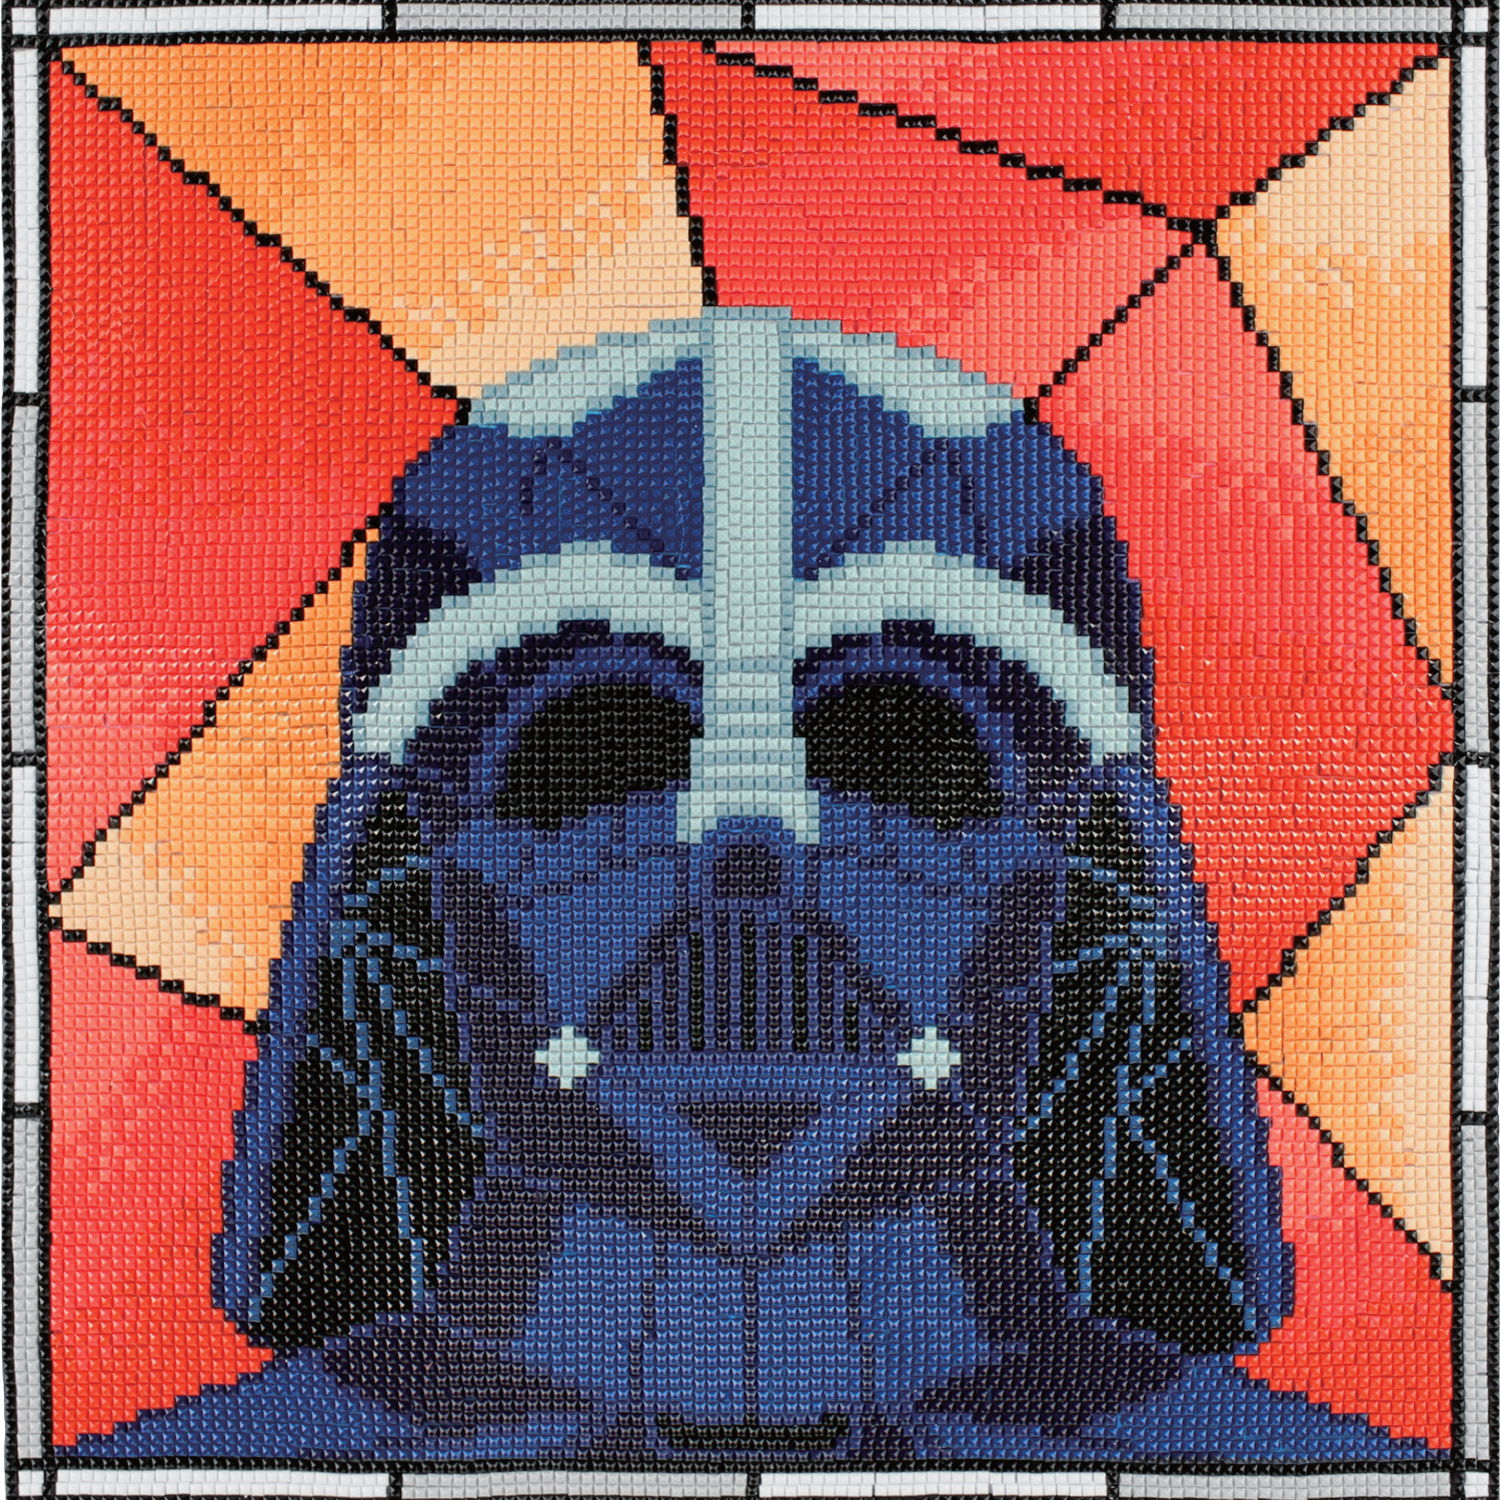 Star Wars Darth Vader Diamond Art Painting Kit, From Diamond Dotz BRAND  NEW, Please See Item Description and Pictures for More Information 